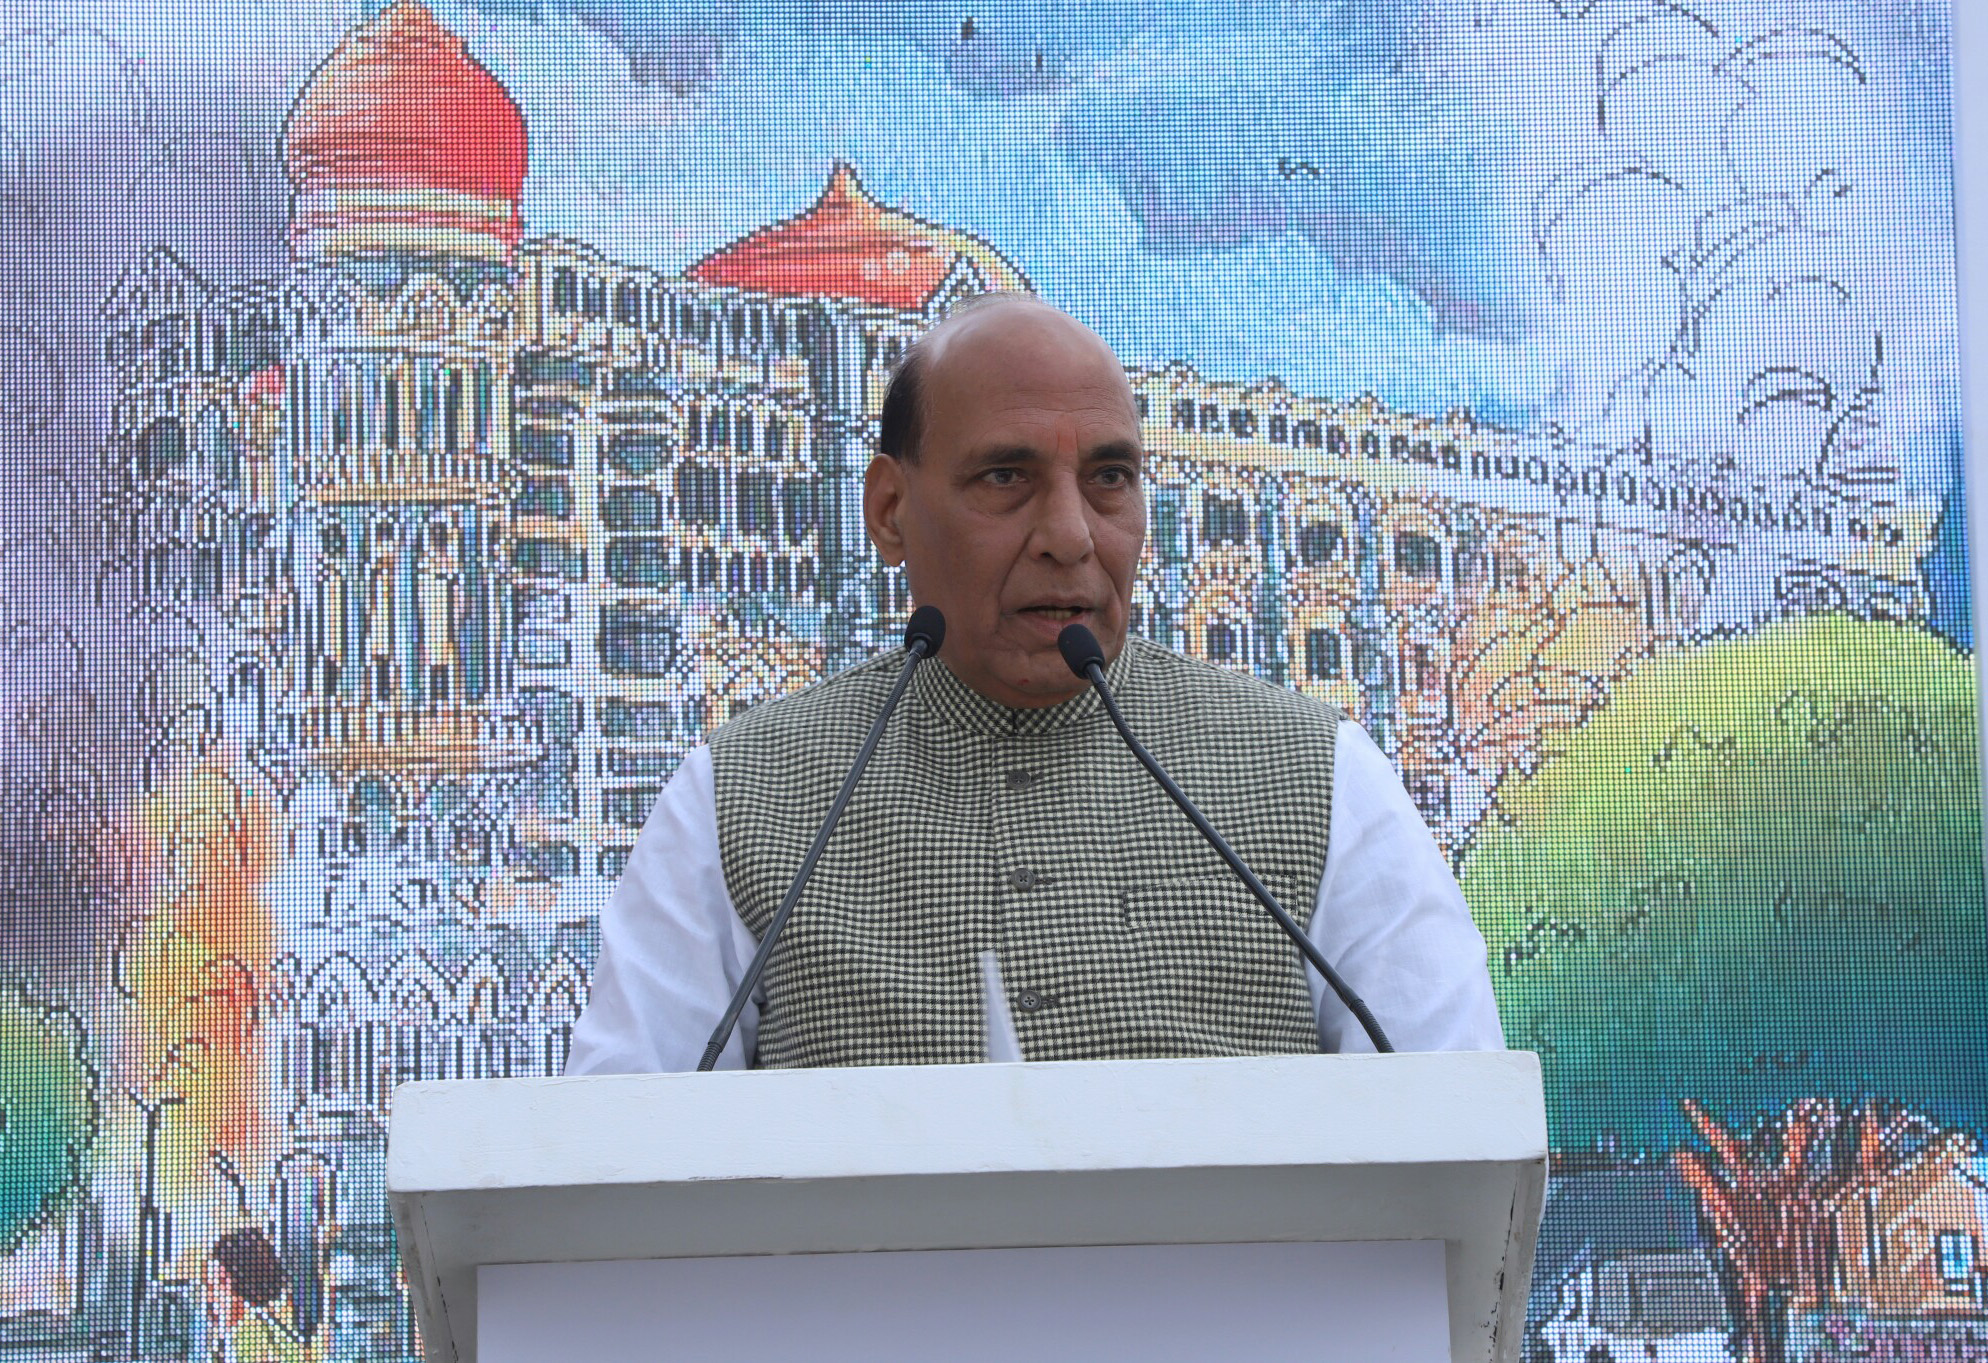 The Union Home Minister, Shri Rajnath Singh addressing the gathering, during a function to raise funds for the Bharat ke Veer fund, in New Delhi on January 20, 2018.